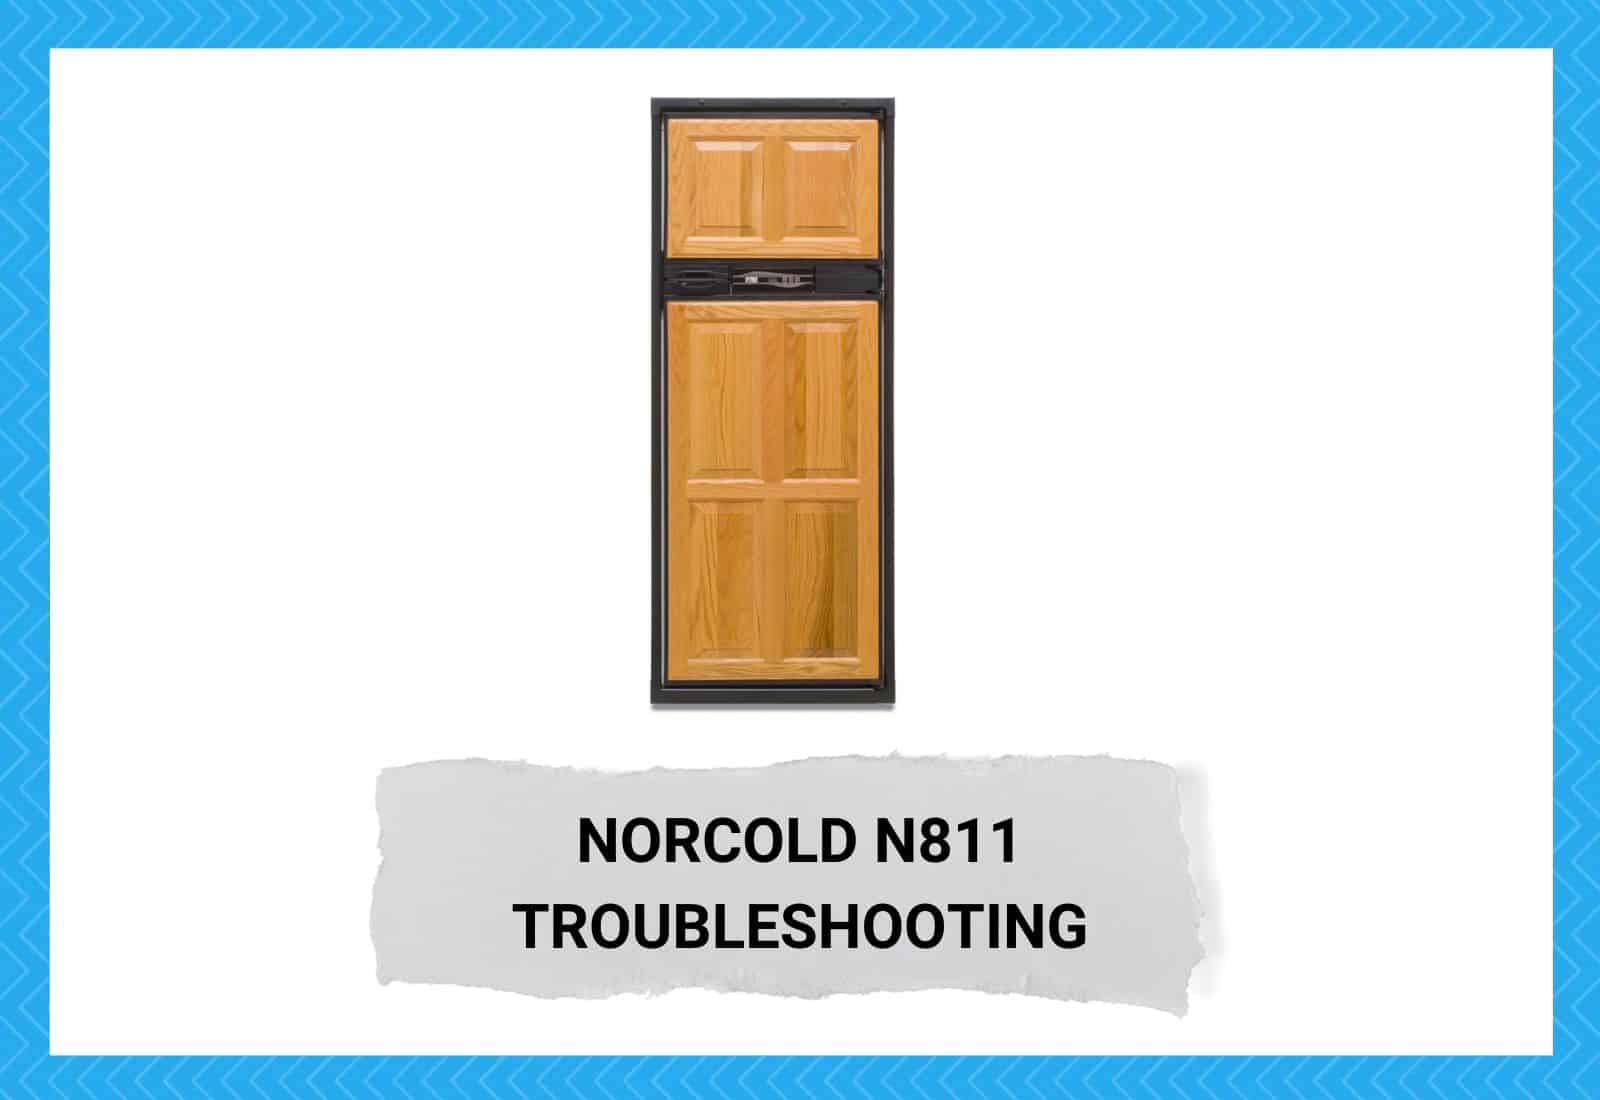 Norcold N811 Troubleshooting